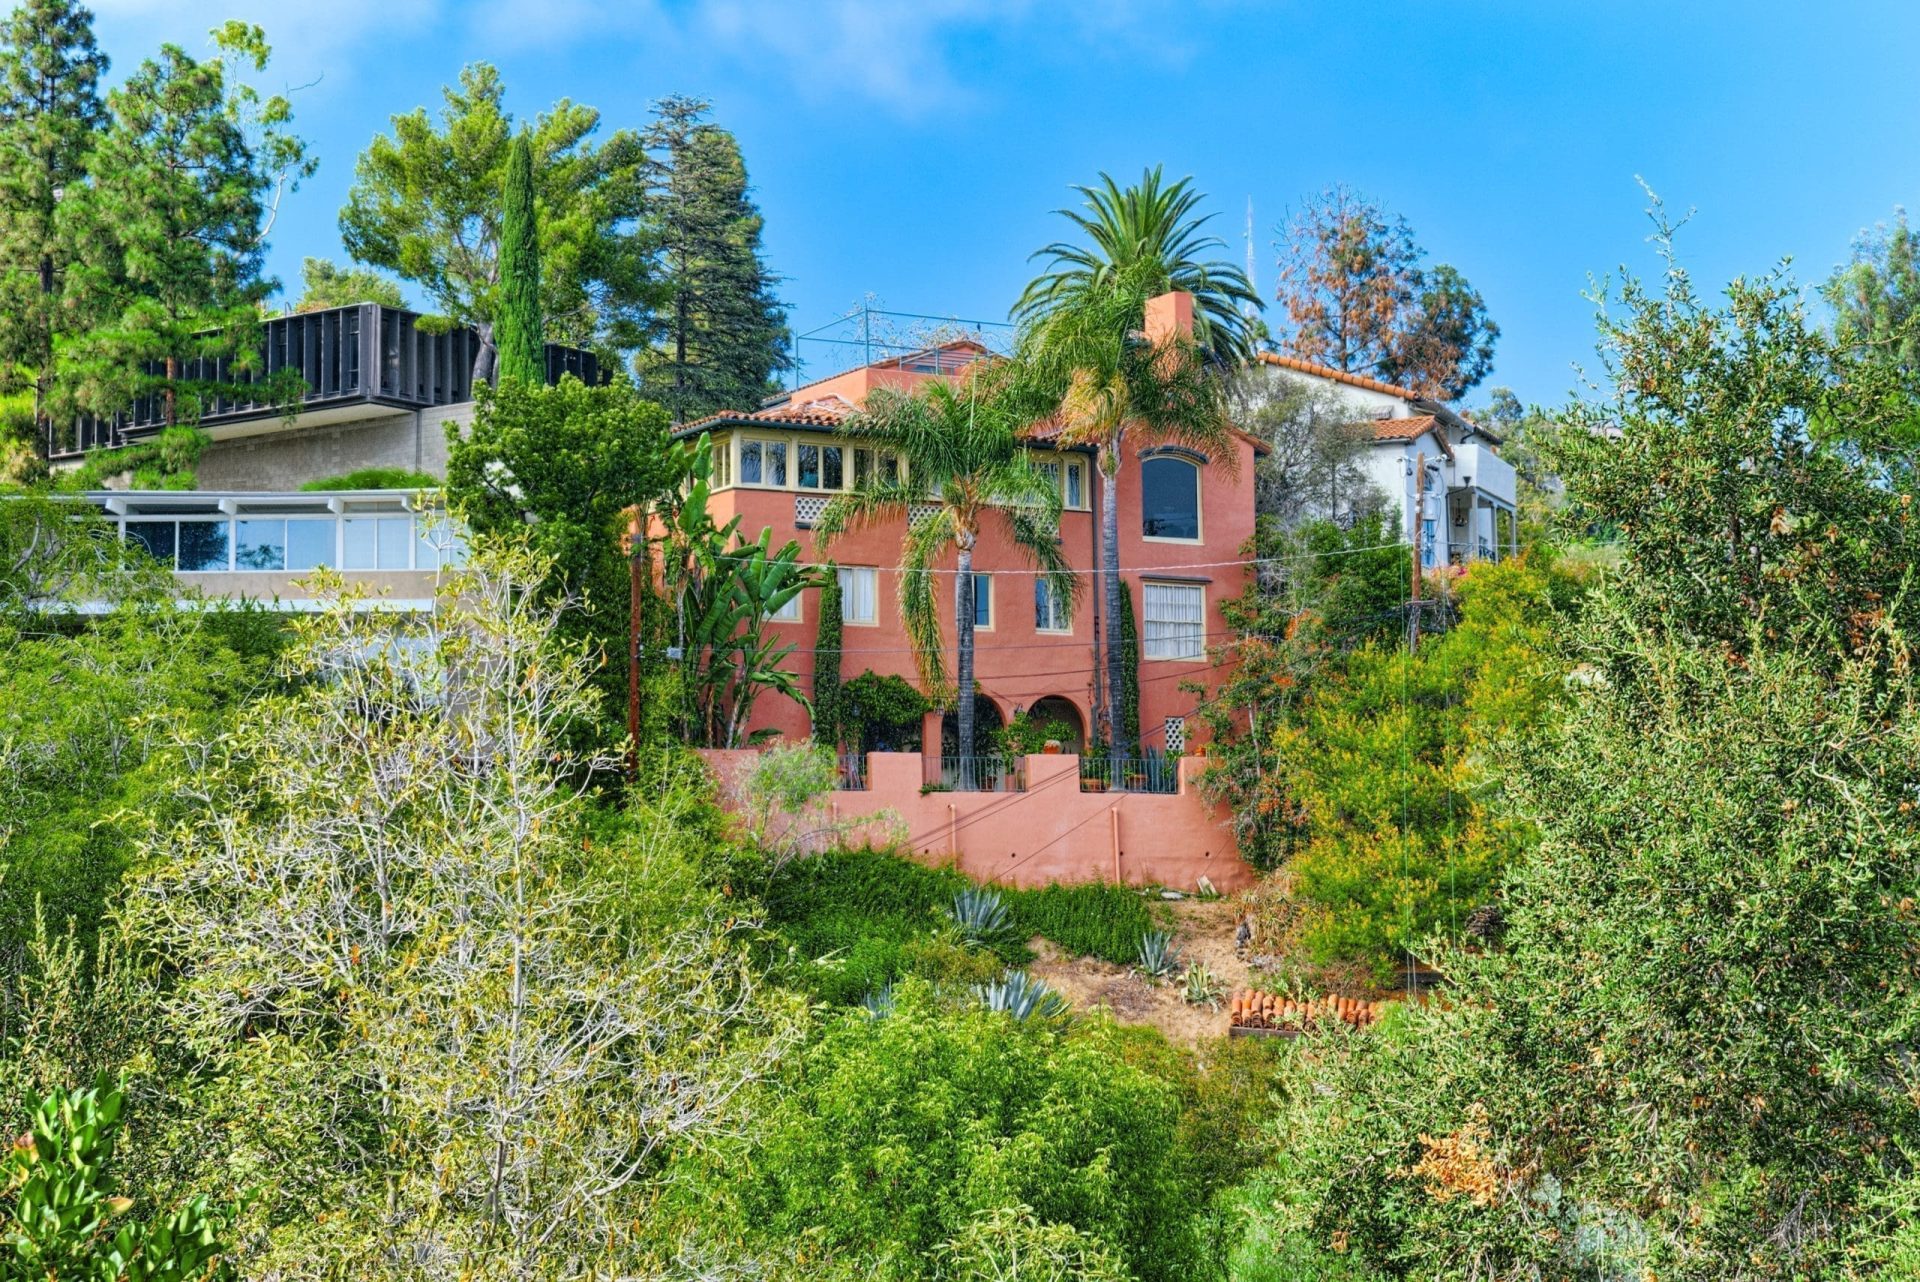 Which Hollywood celebrity has the best house?